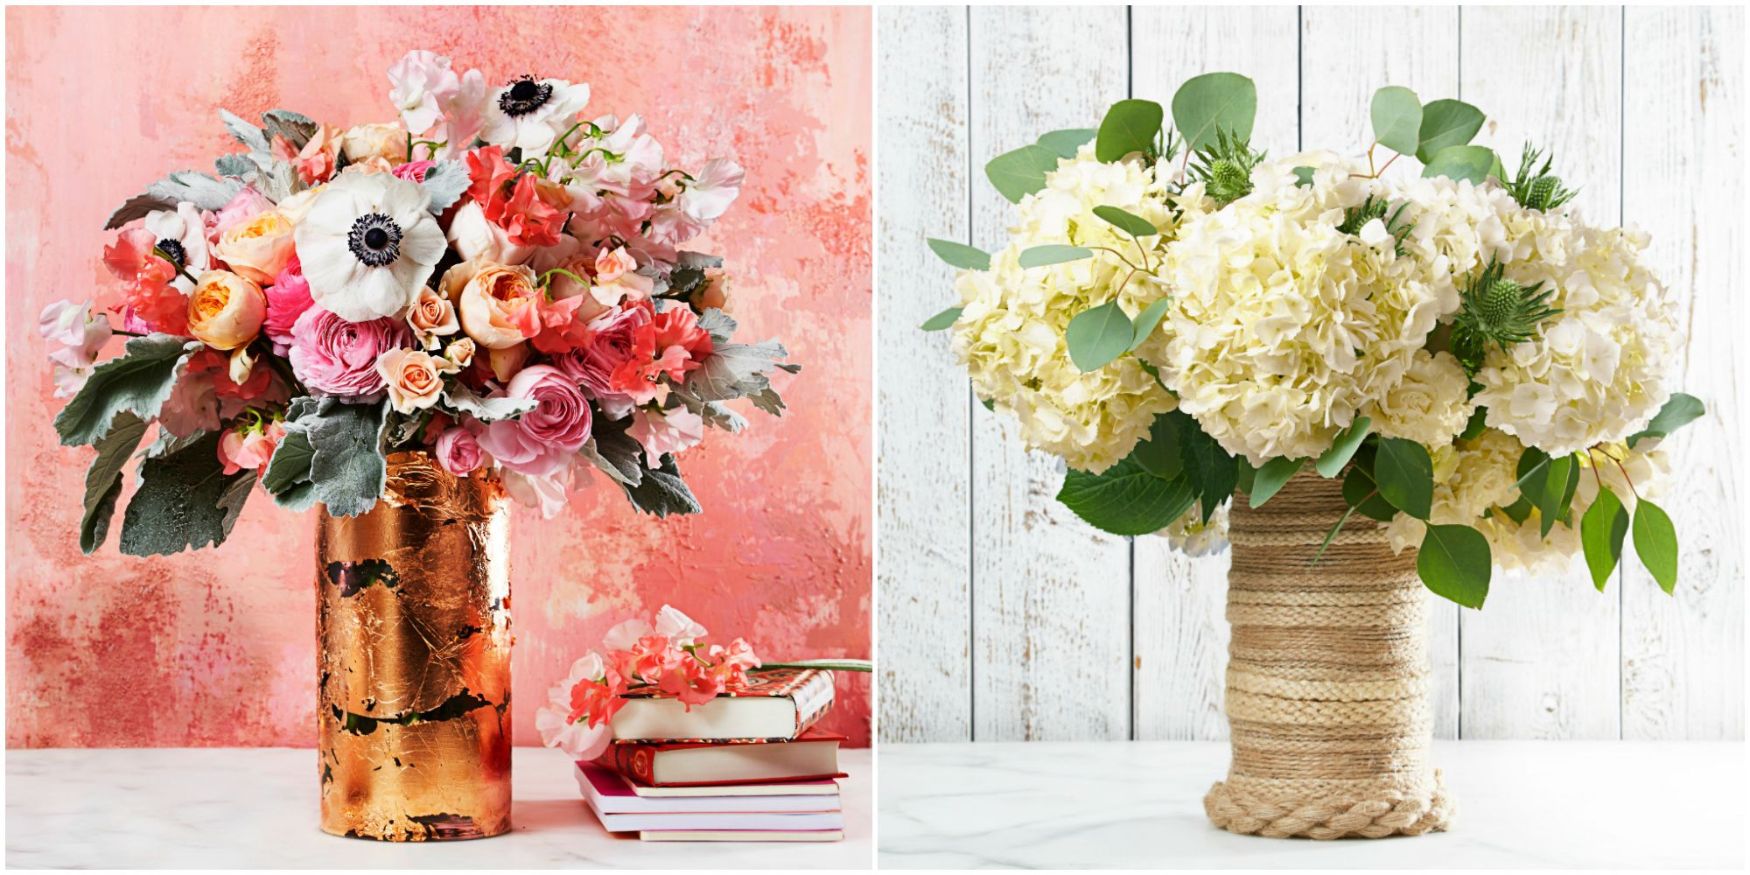 What To Fill Vases With For Decoration